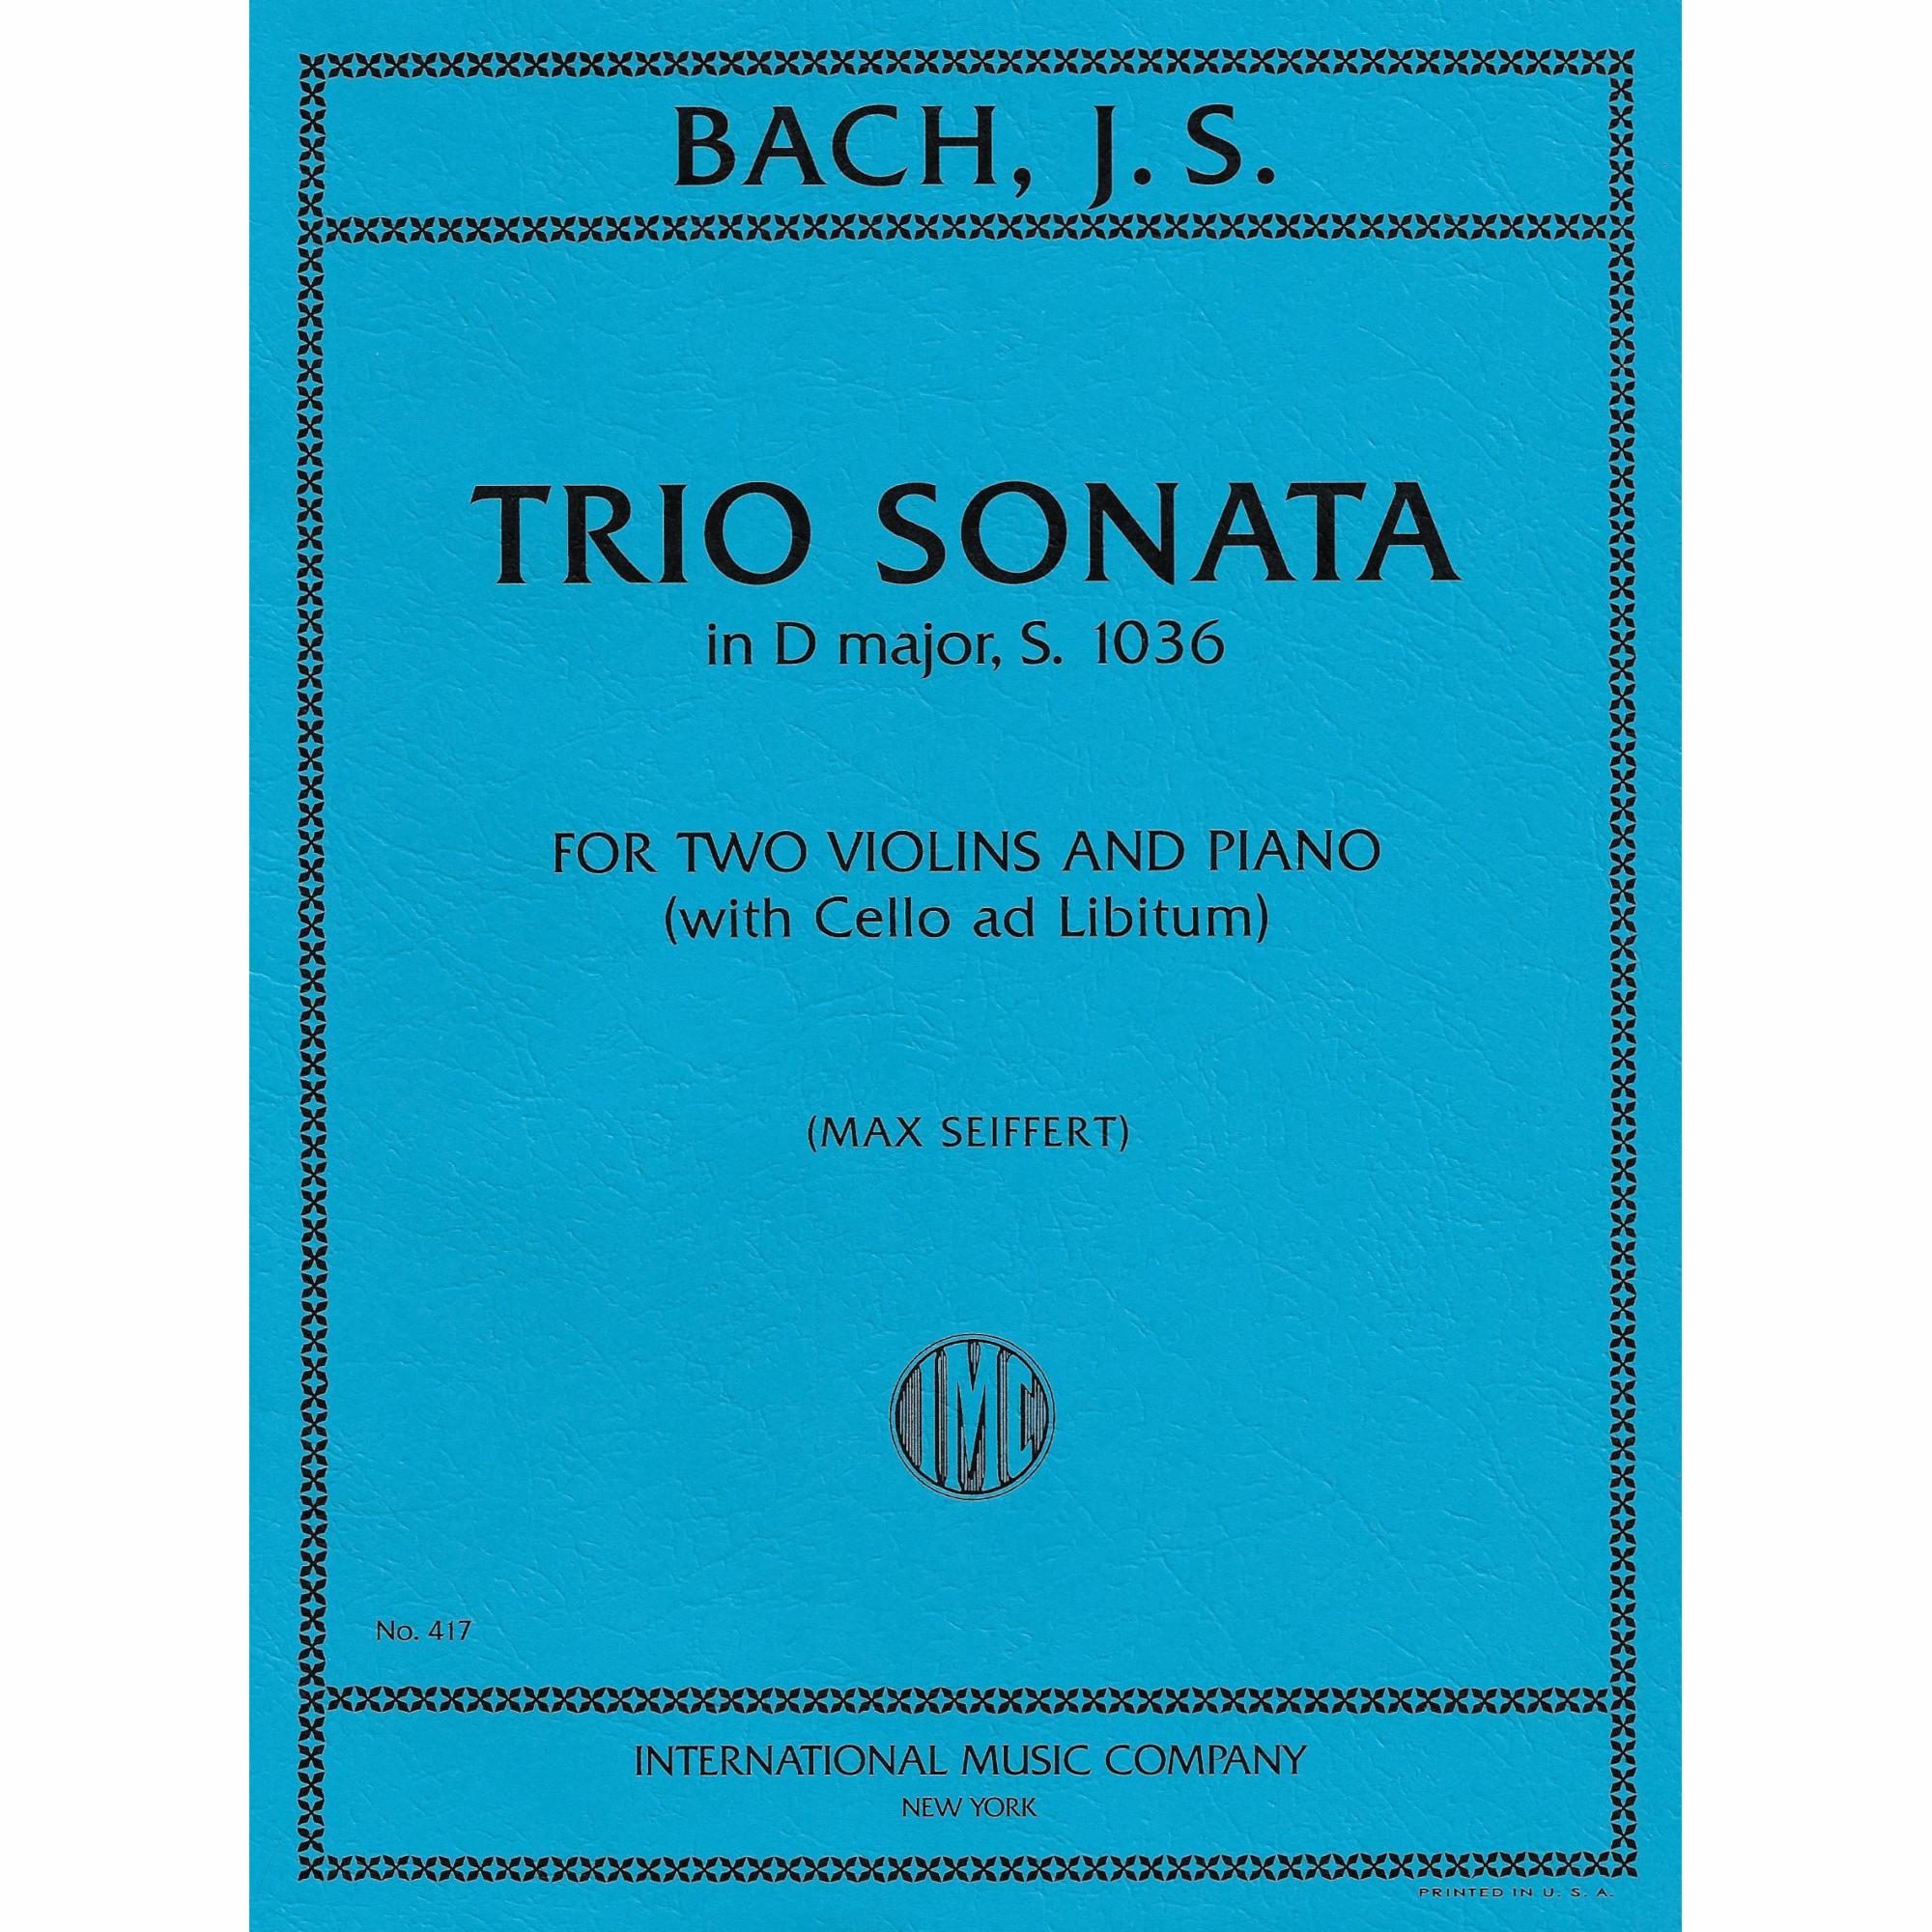 Bach -- Trio Sonata in D Major, S. 1036 for Two Violins and Piano